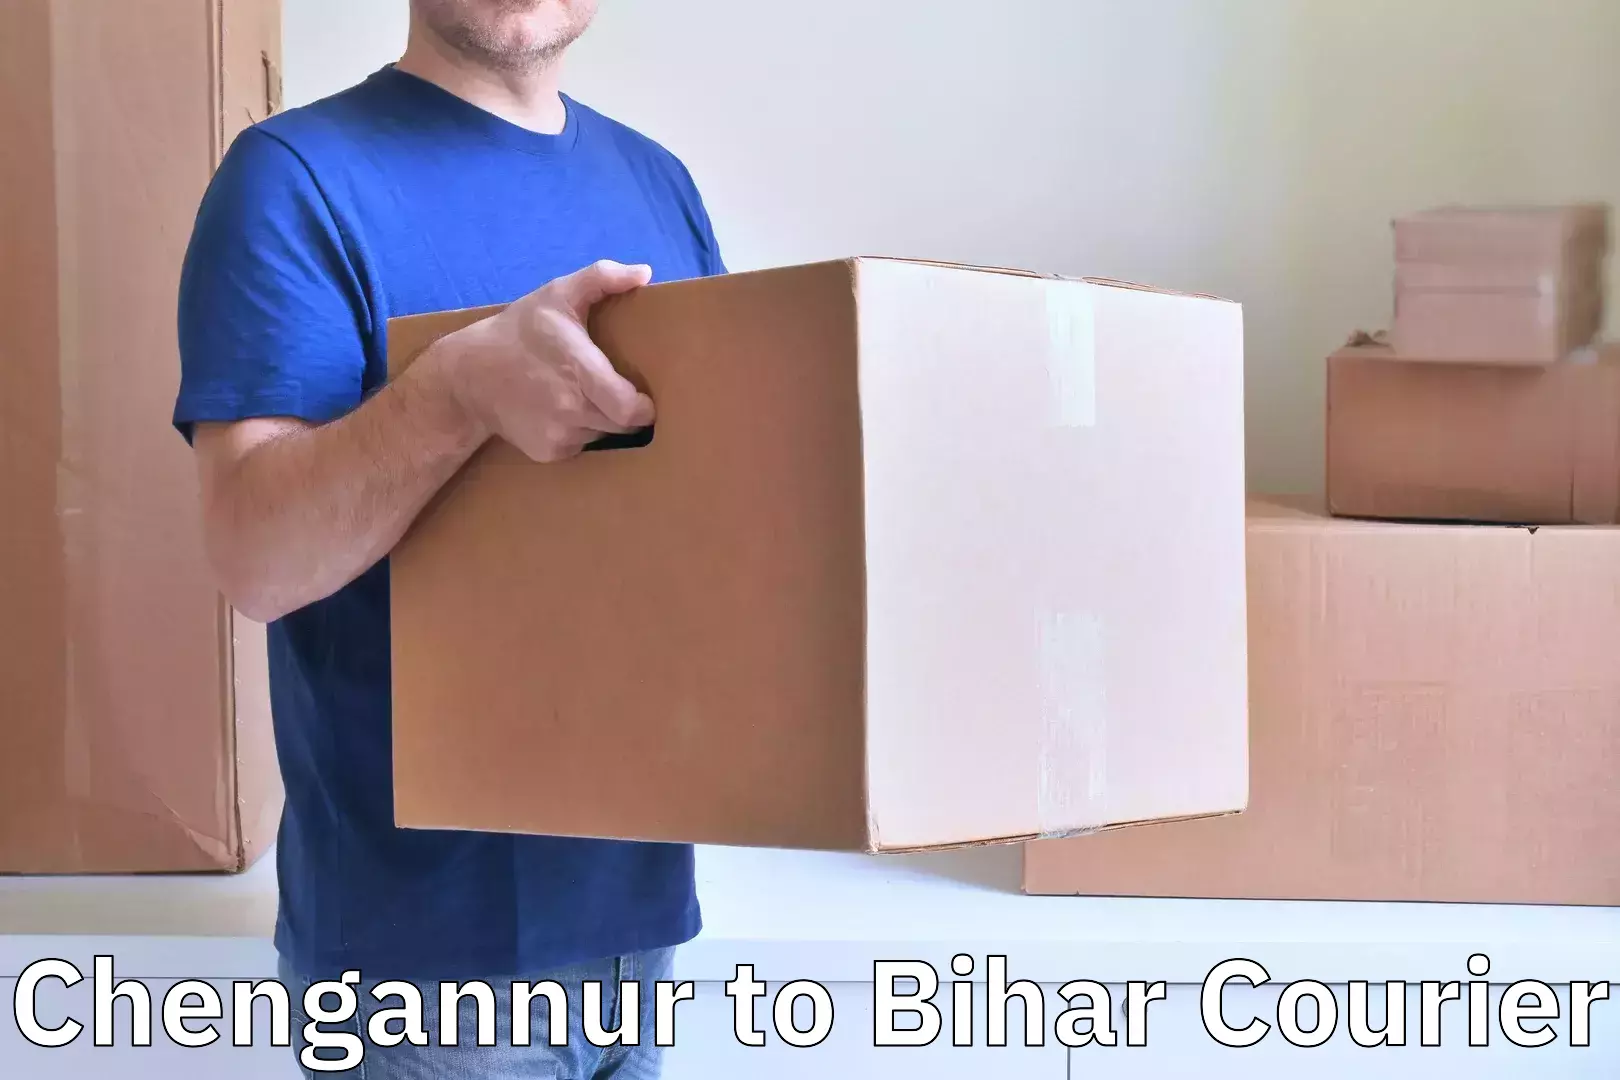 Personal effects shipping Chengannur to Bhojpur